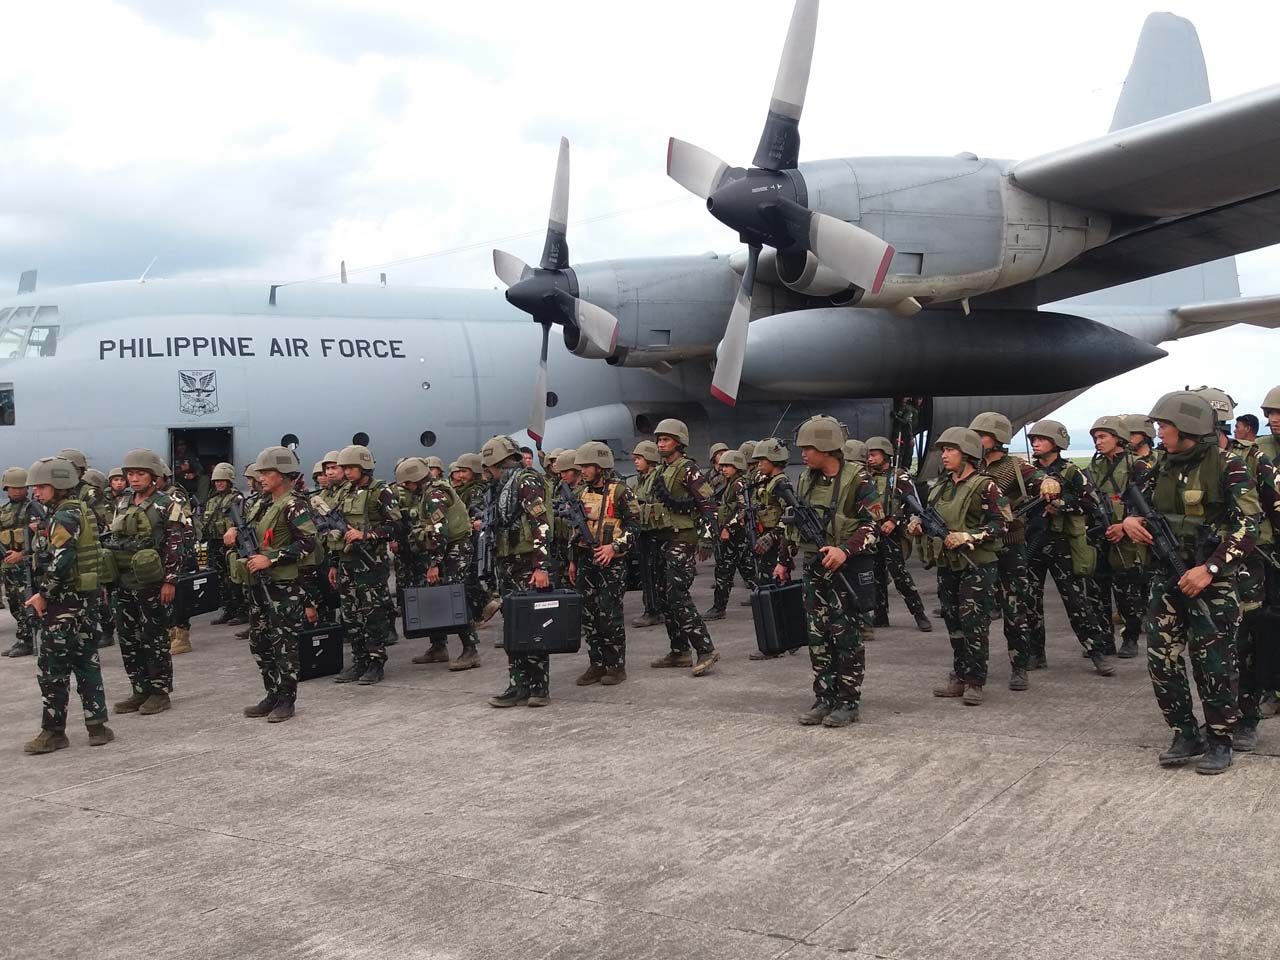 A moving homecoming in Tacloban for Marawi war veterans